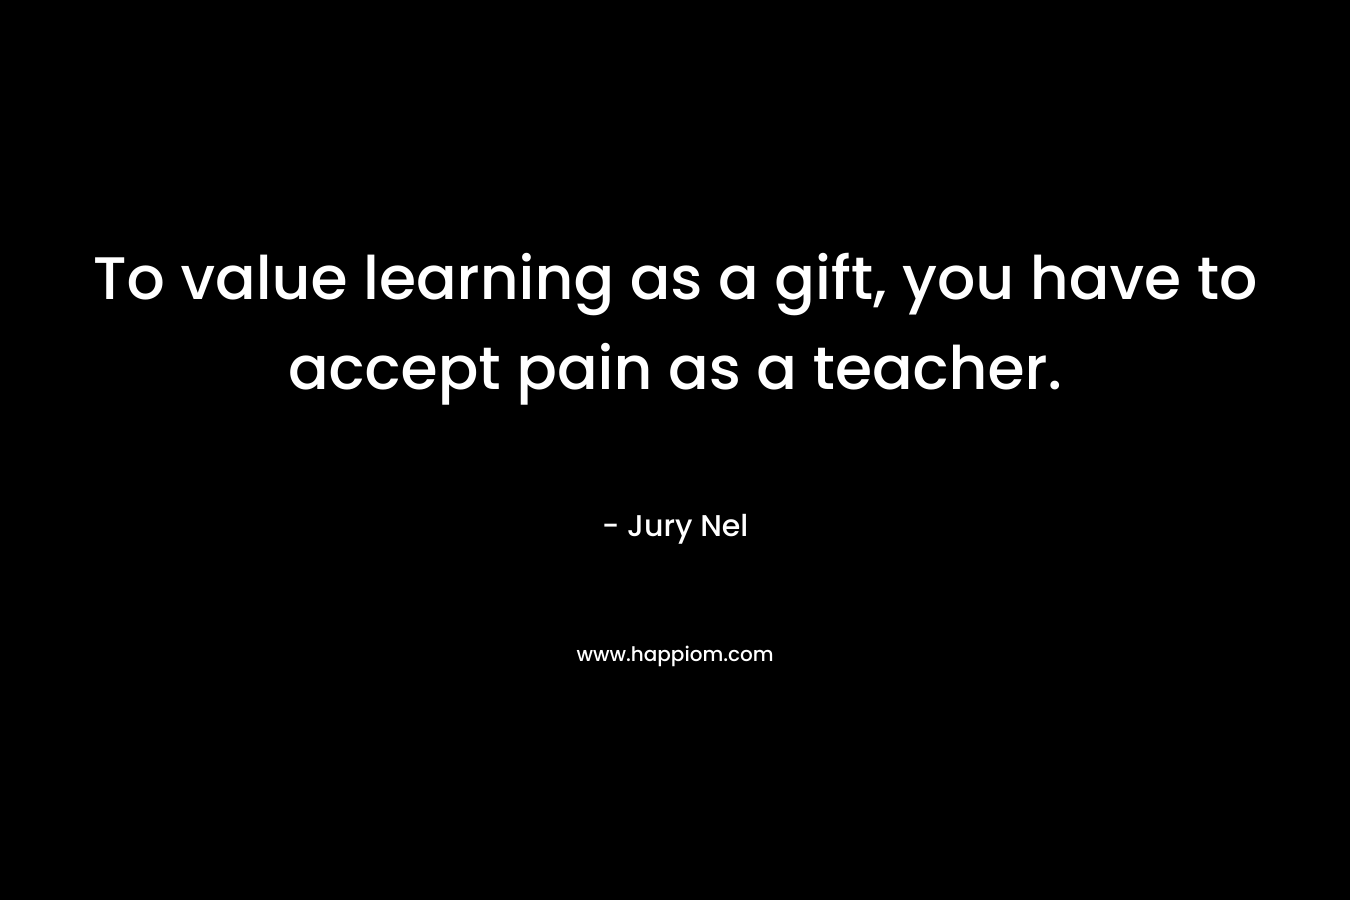 To value learning as a gift, you have to accept pain as a teacher.